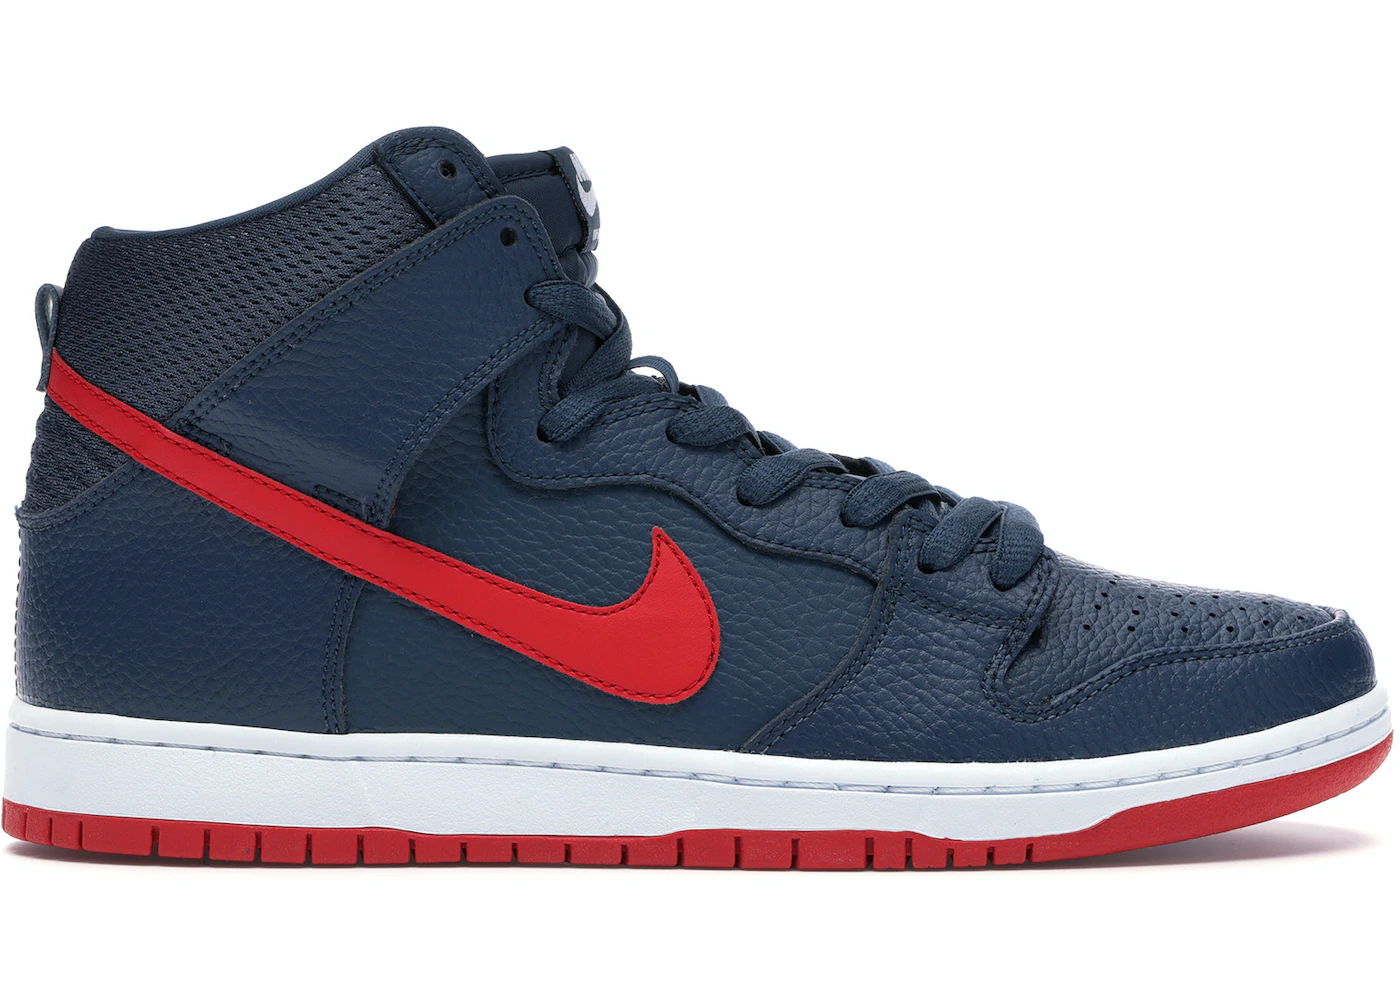 Furious Round and round here Nike Dunk SB High Squadron Blue University Red - 305050-463